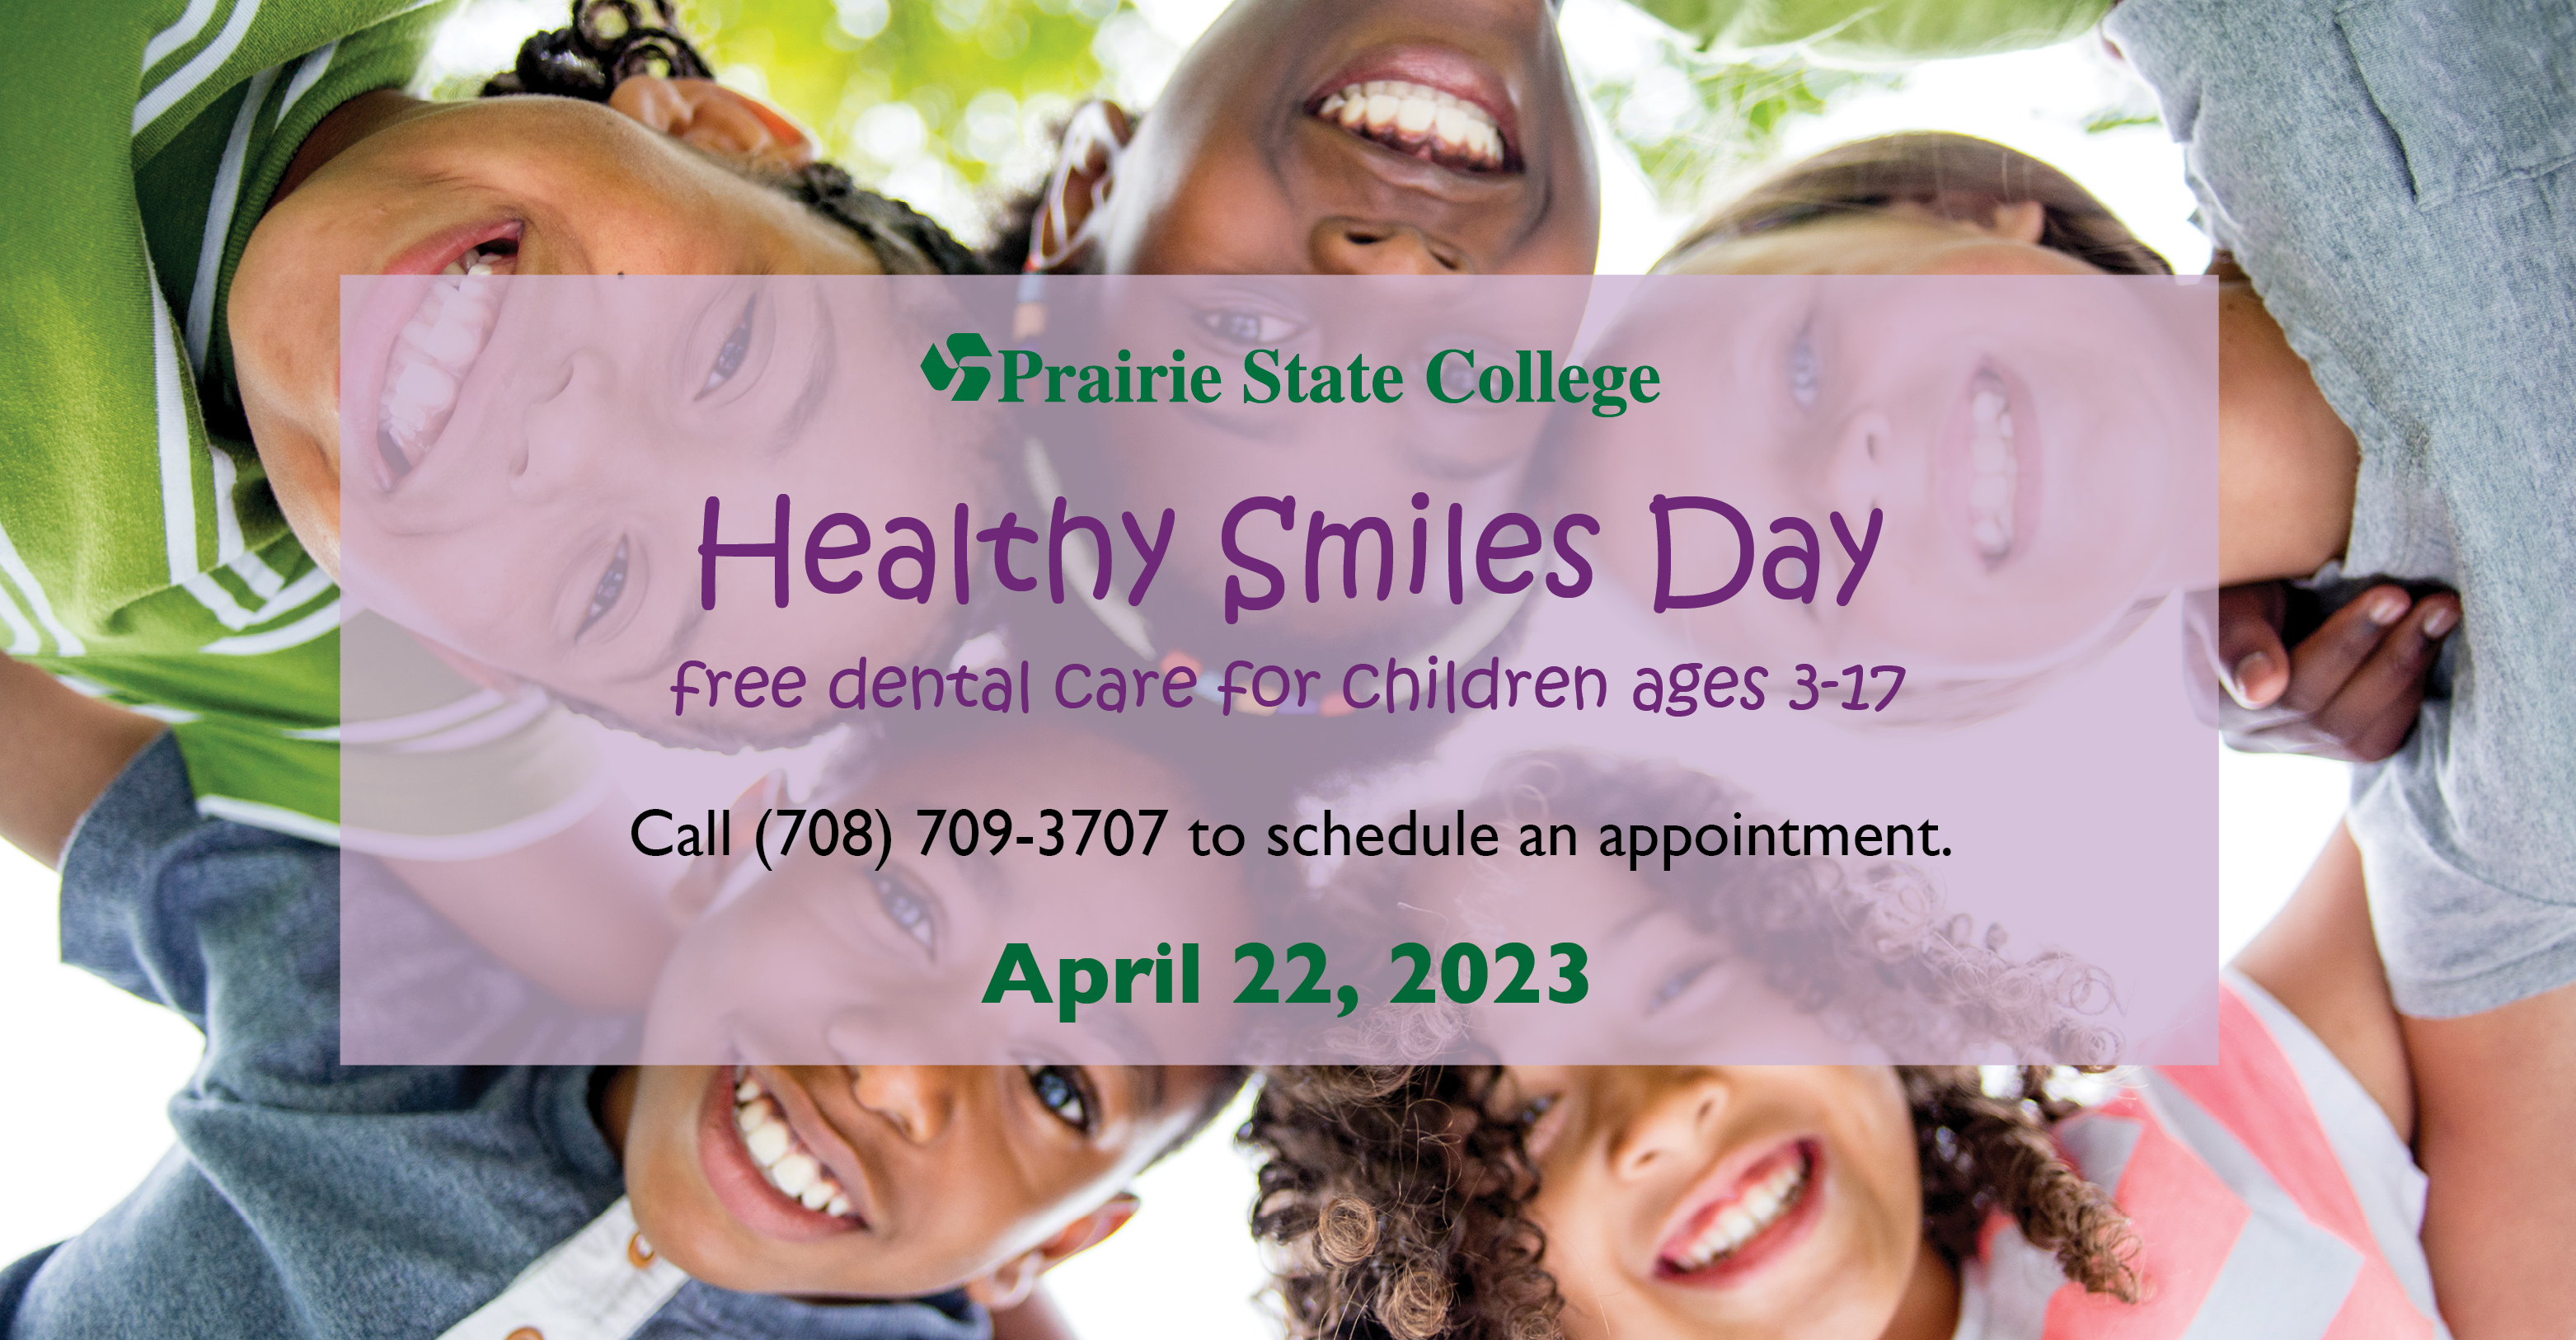 Healthy Smiles Day is April 22nd 2023 